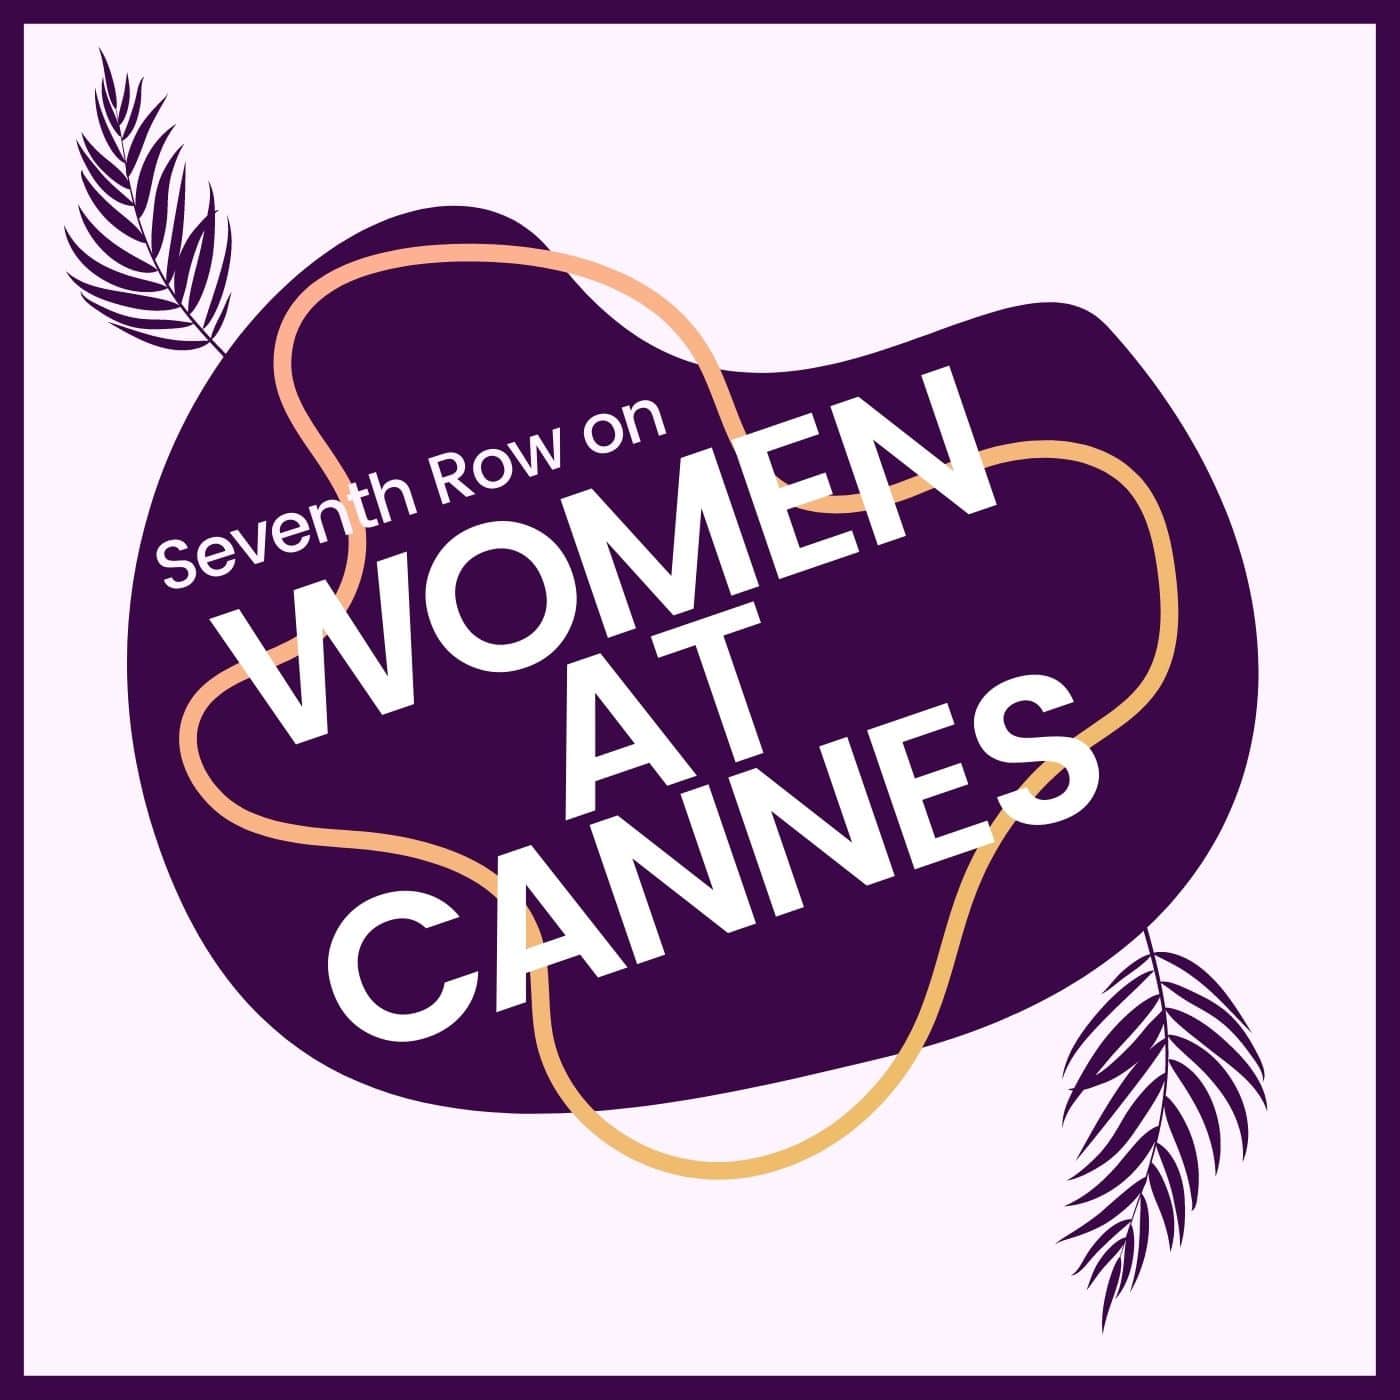 The Women at Cannes podcast seasons logo, a podcast season exploring Women directors at Cannes, like Chile 1976, the first feature film from Manuela Martelli